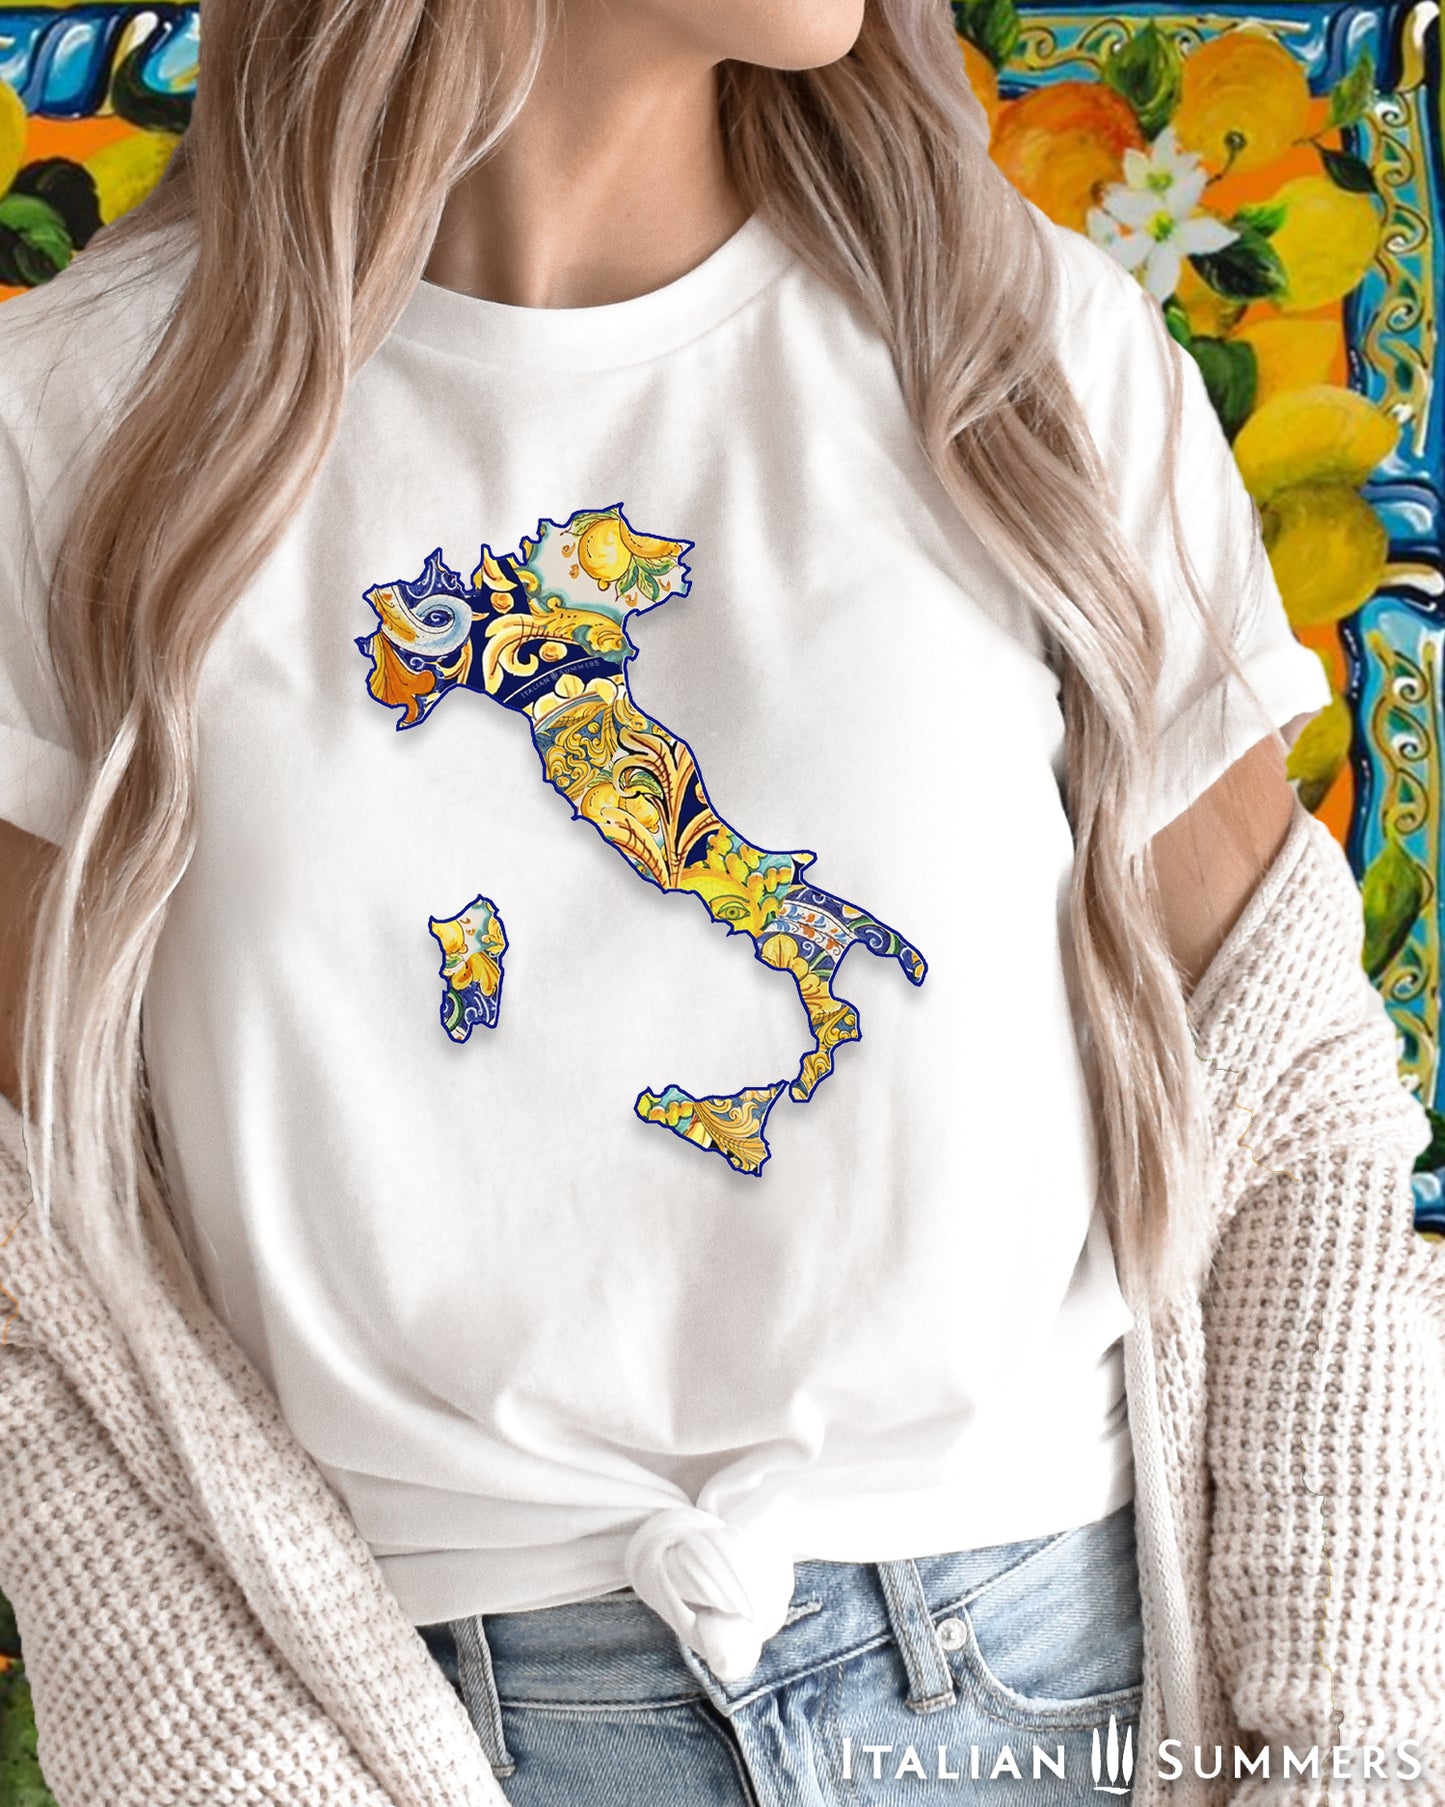 An Italy-inspired cotton Unisex crew neck T shirt with a print of the county of Italy composed of Italian maiolica tile decorations , an original design made by Italian Summers